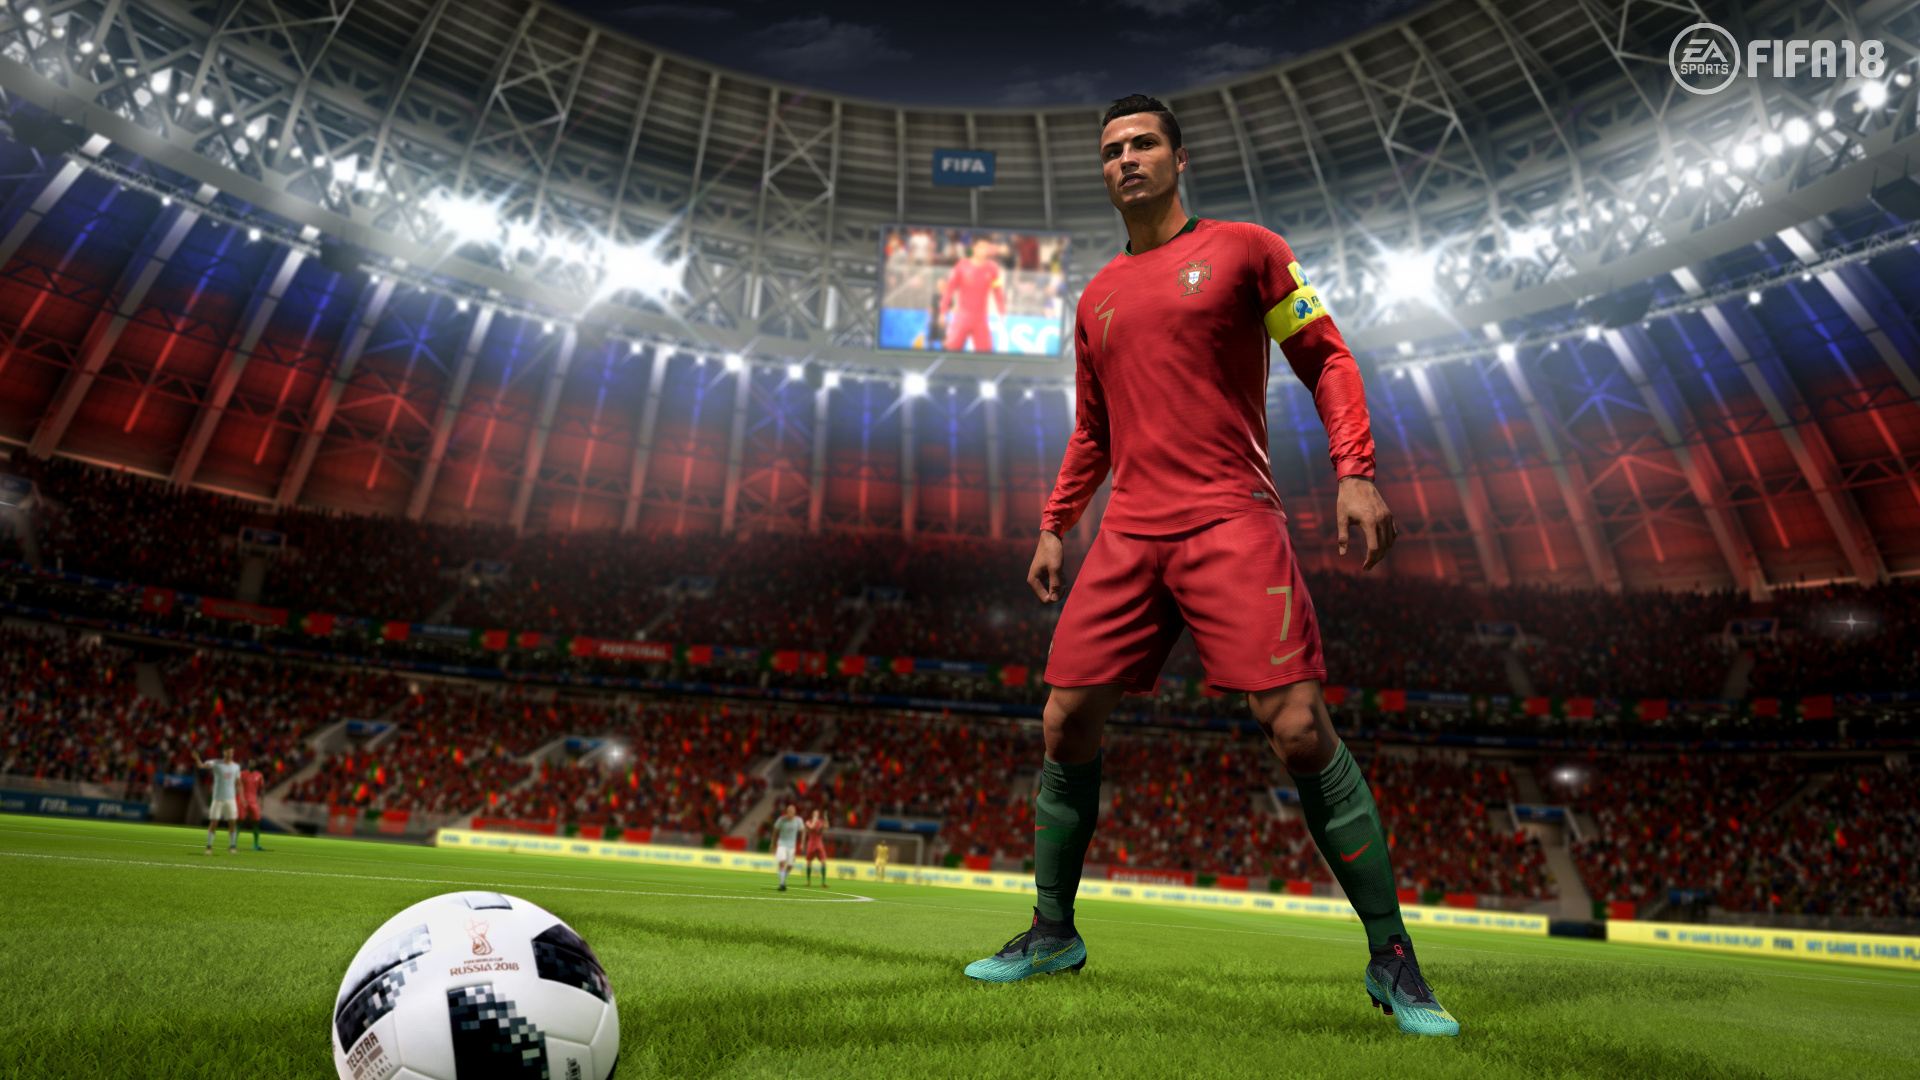 Fifa 18, 2018 World Cup, ea Sports, Electronic Arts, Playstation 4. Wallpaper in 1920x1080 Resolution